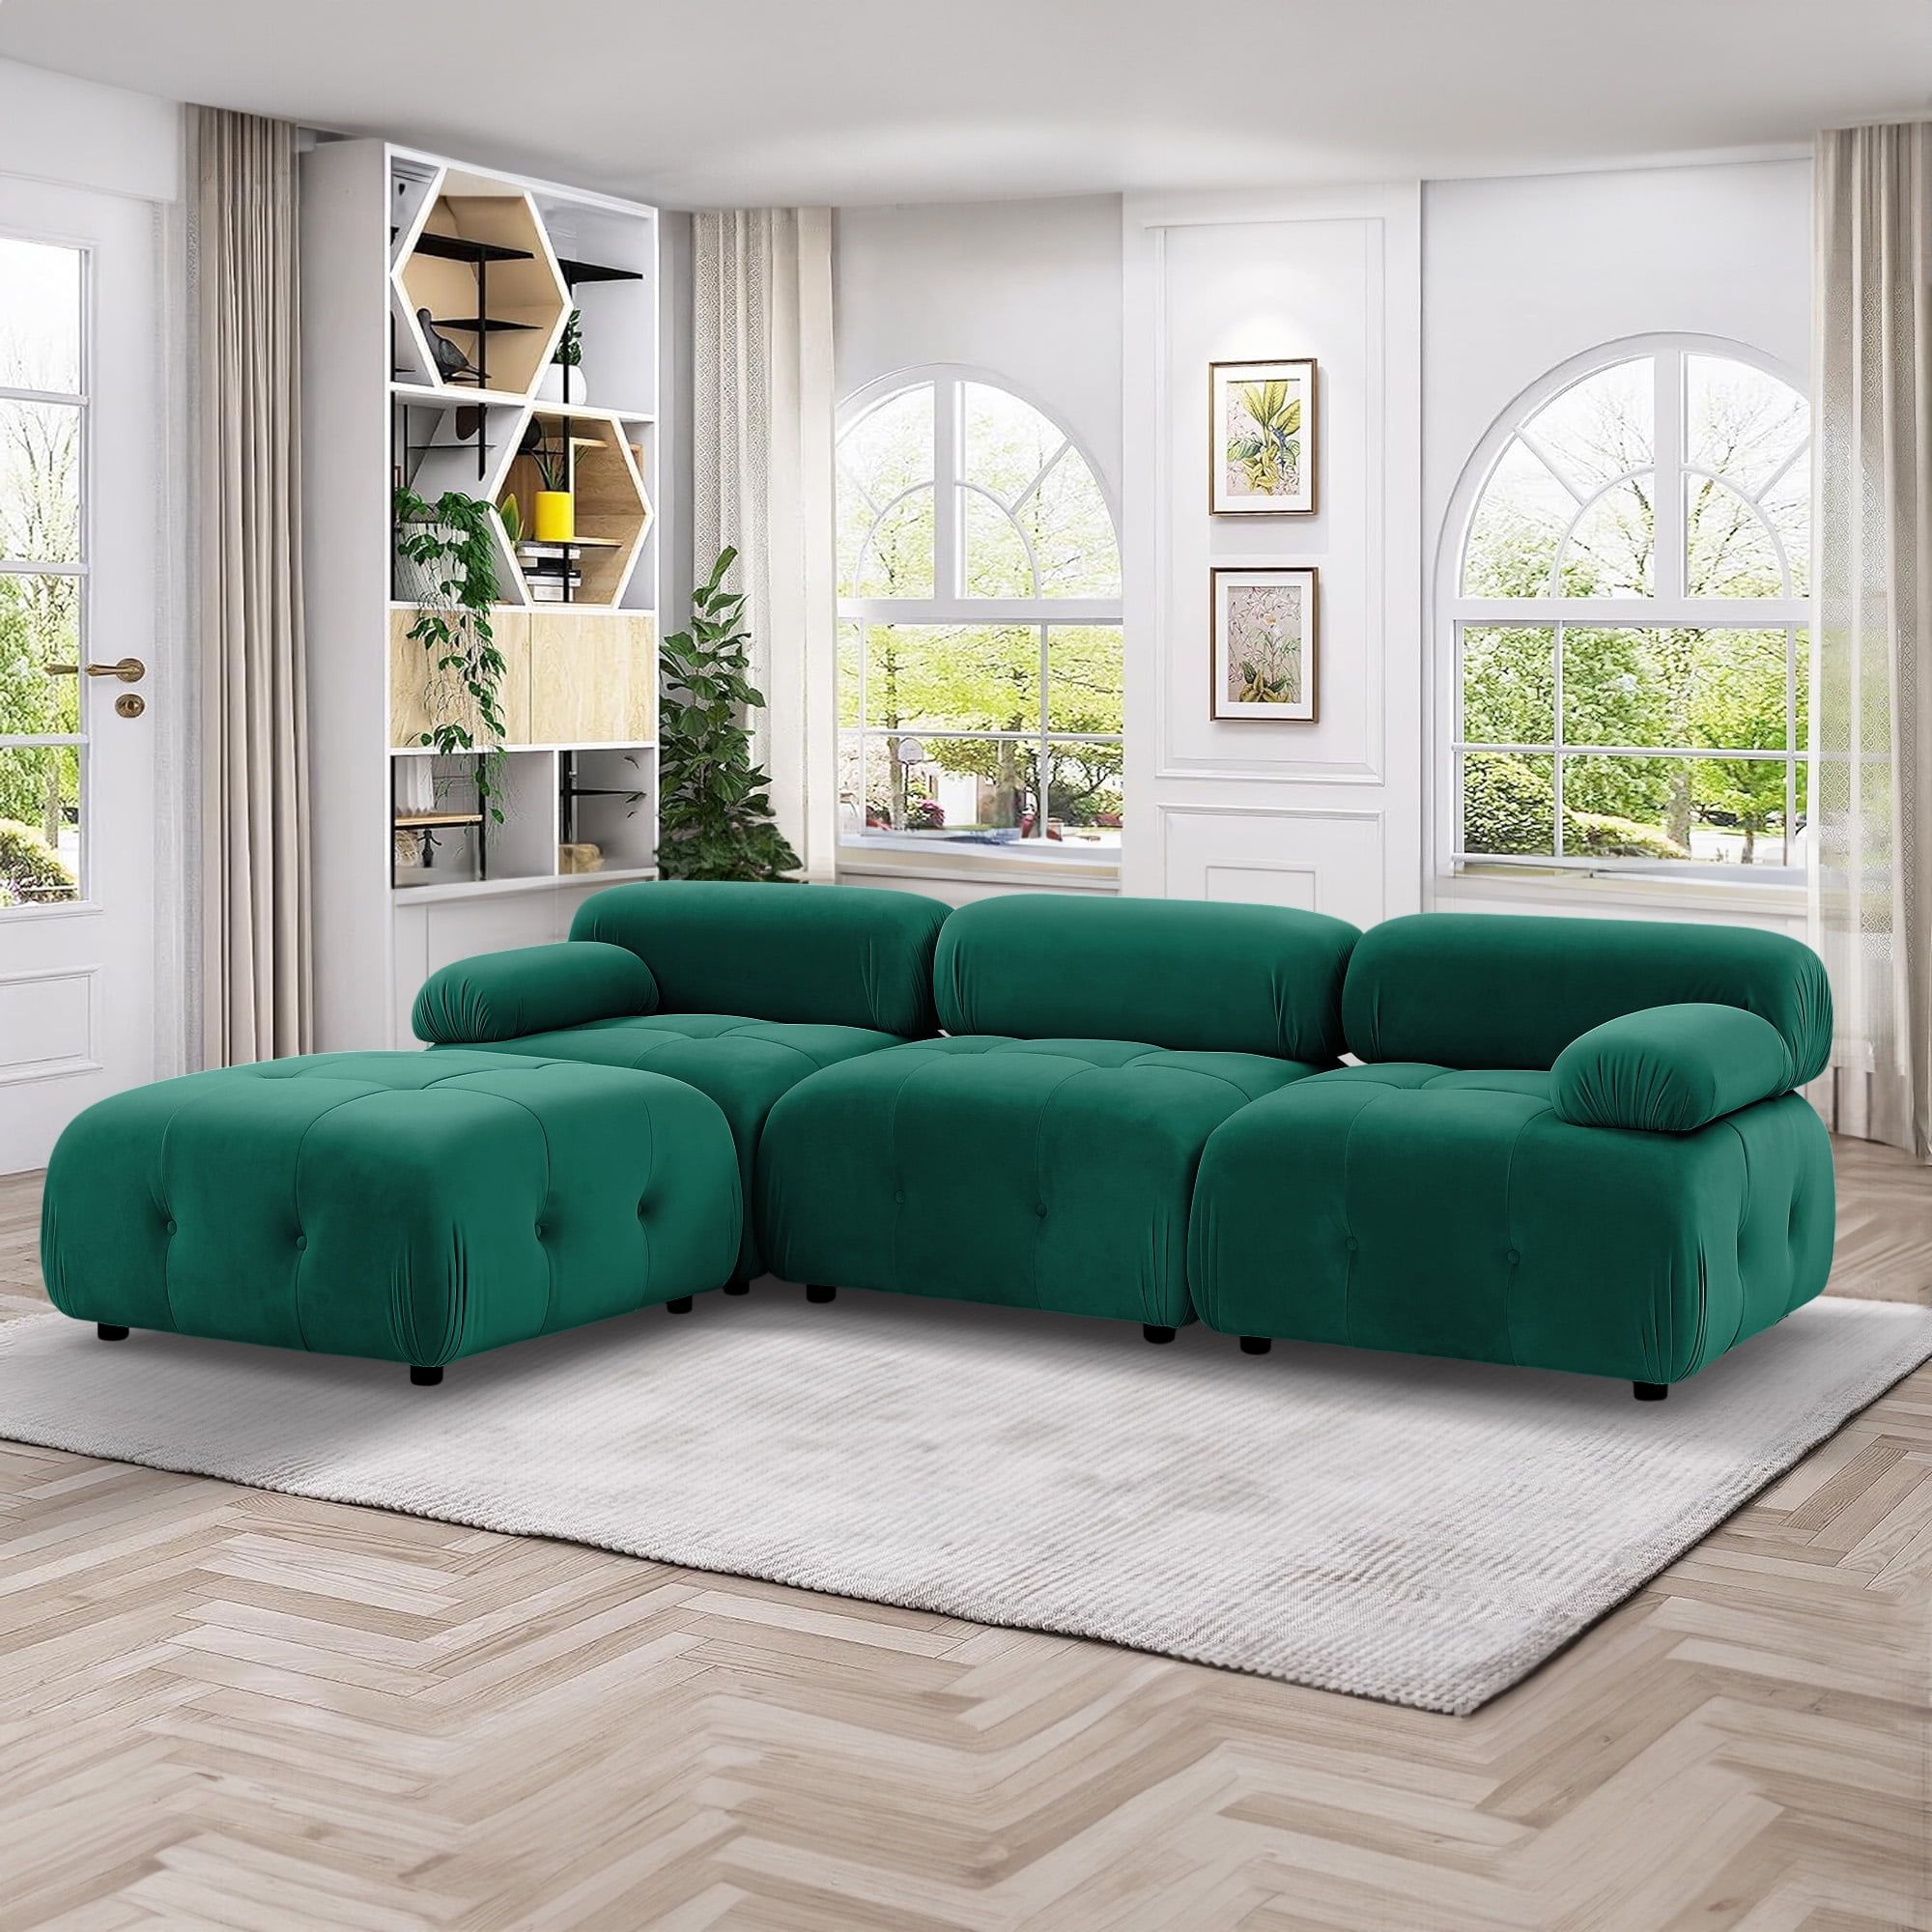 Aukfa 93" Sectional Sofa, Living Room Modular Couch With Ottoman, Pillow  Top Arms, Velvet, Green – Walmart With Regard To Green Velvet Modular Sectionals (View 5 of 15)